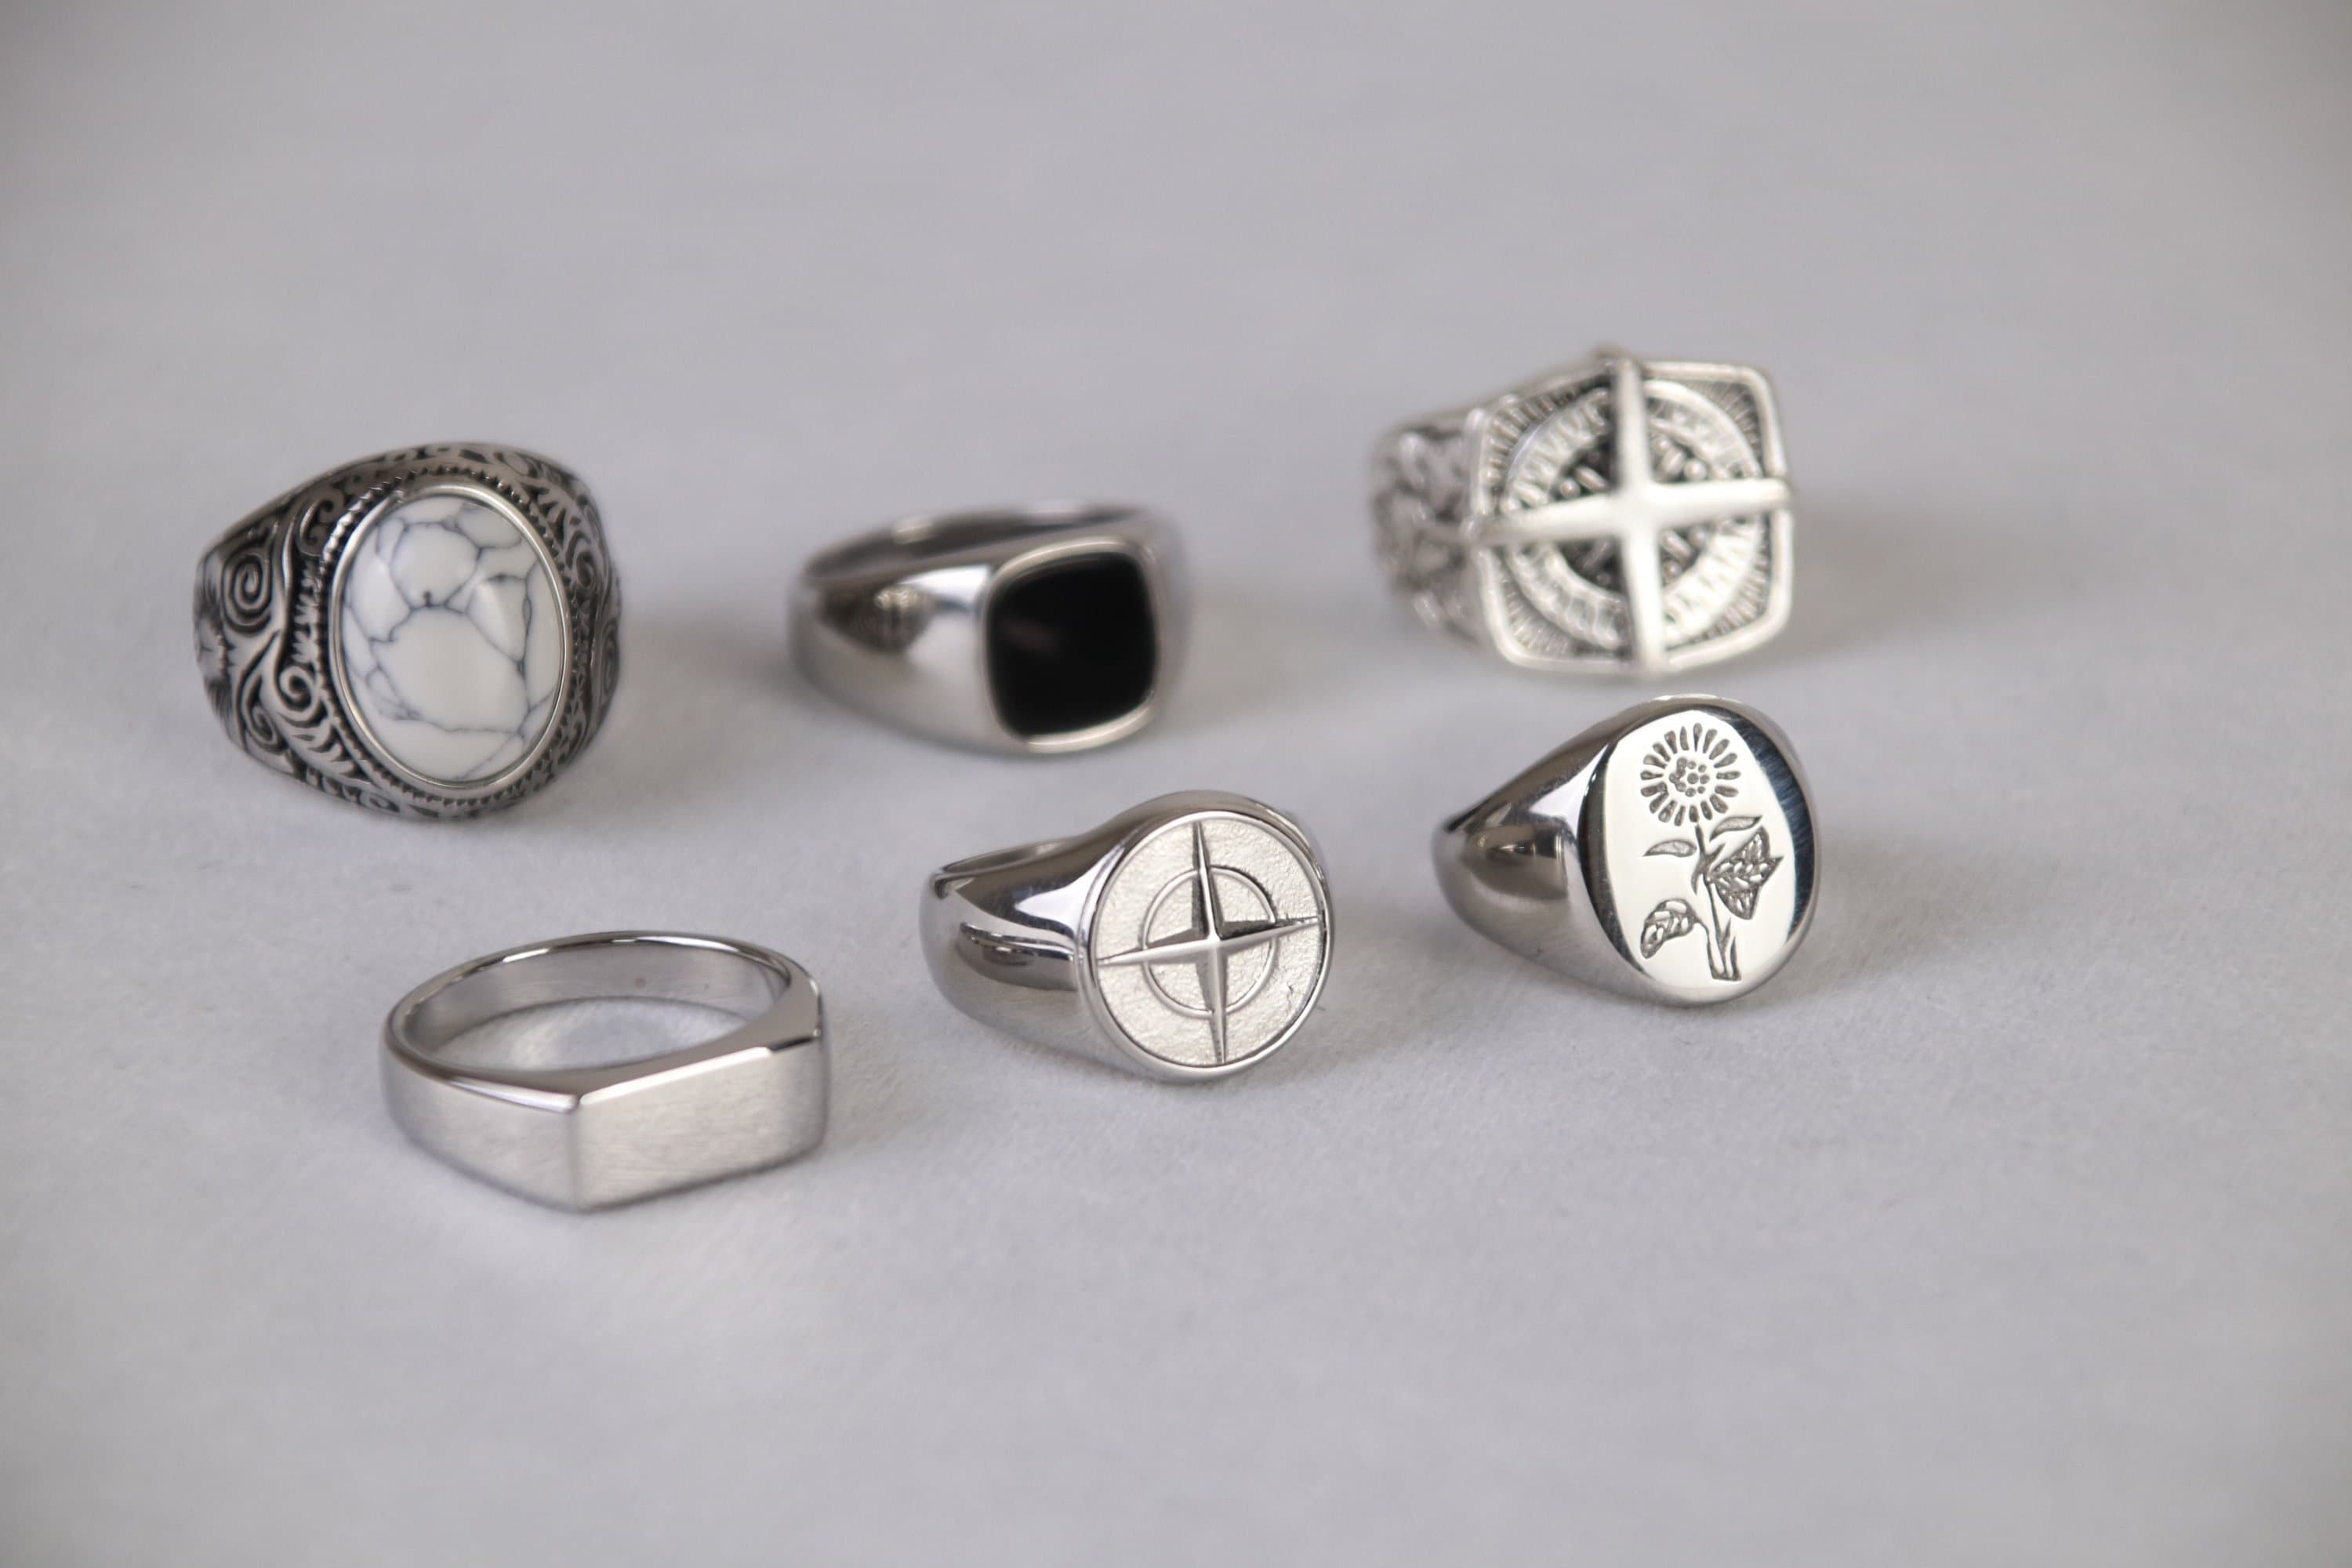 Polished Stainless Steel Signet Ring - The Abbeydale Signet